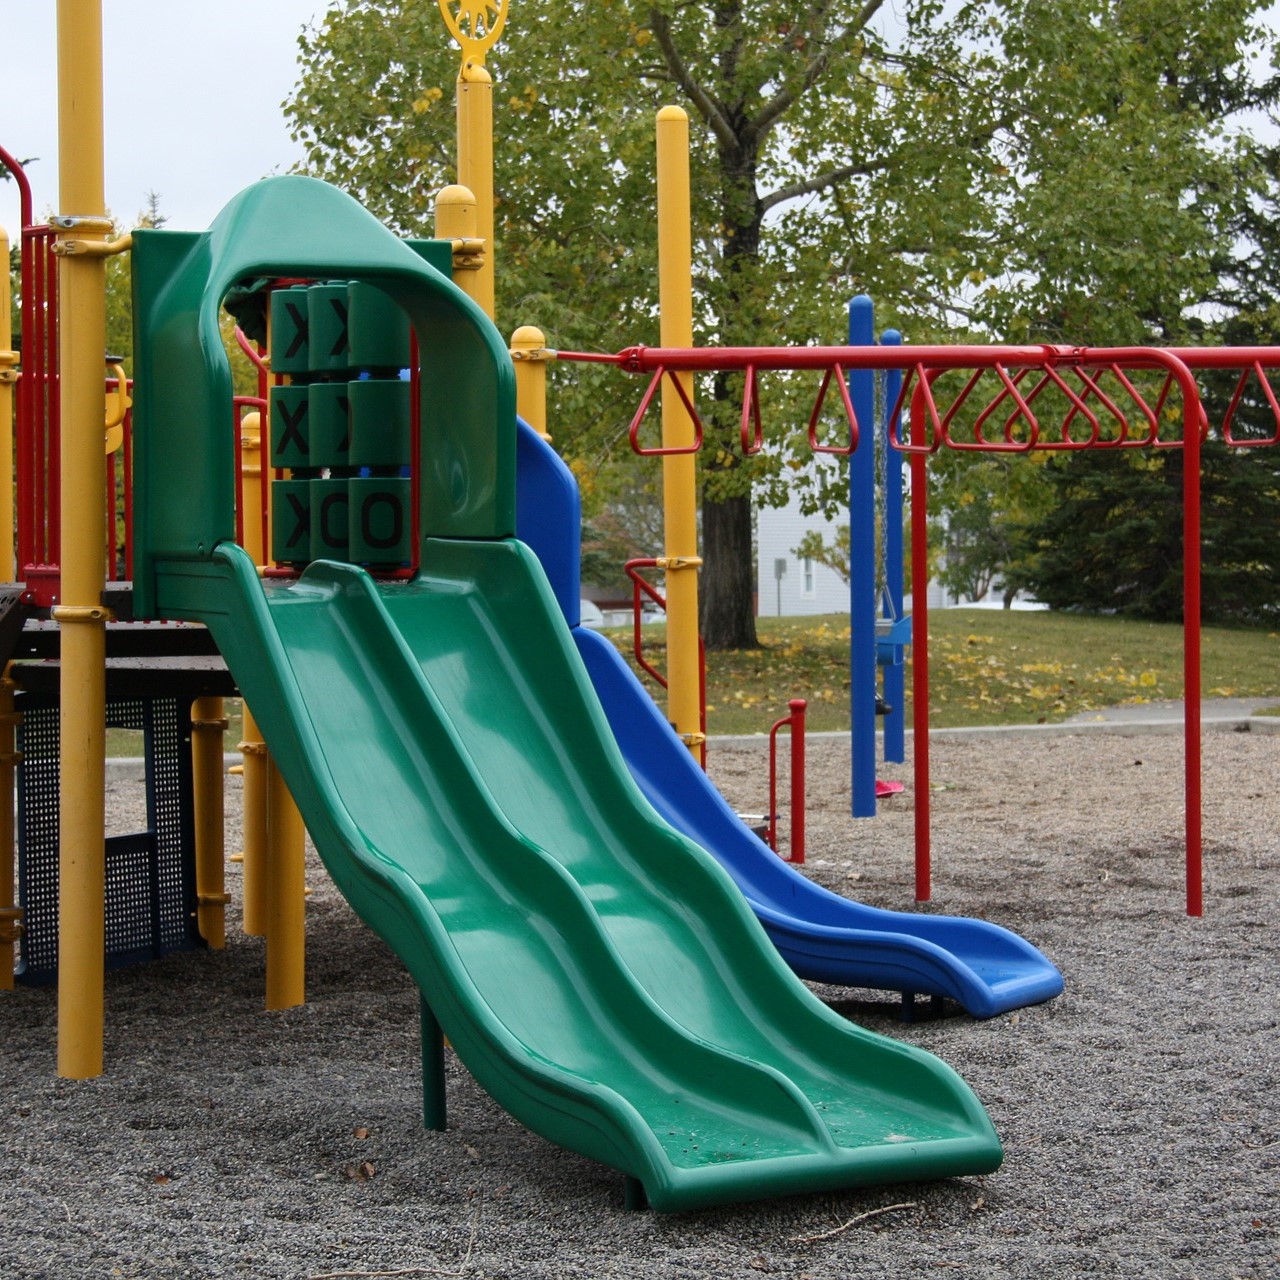 An outdoor play park, with a green slide, red monkey bars and yellow pillars.